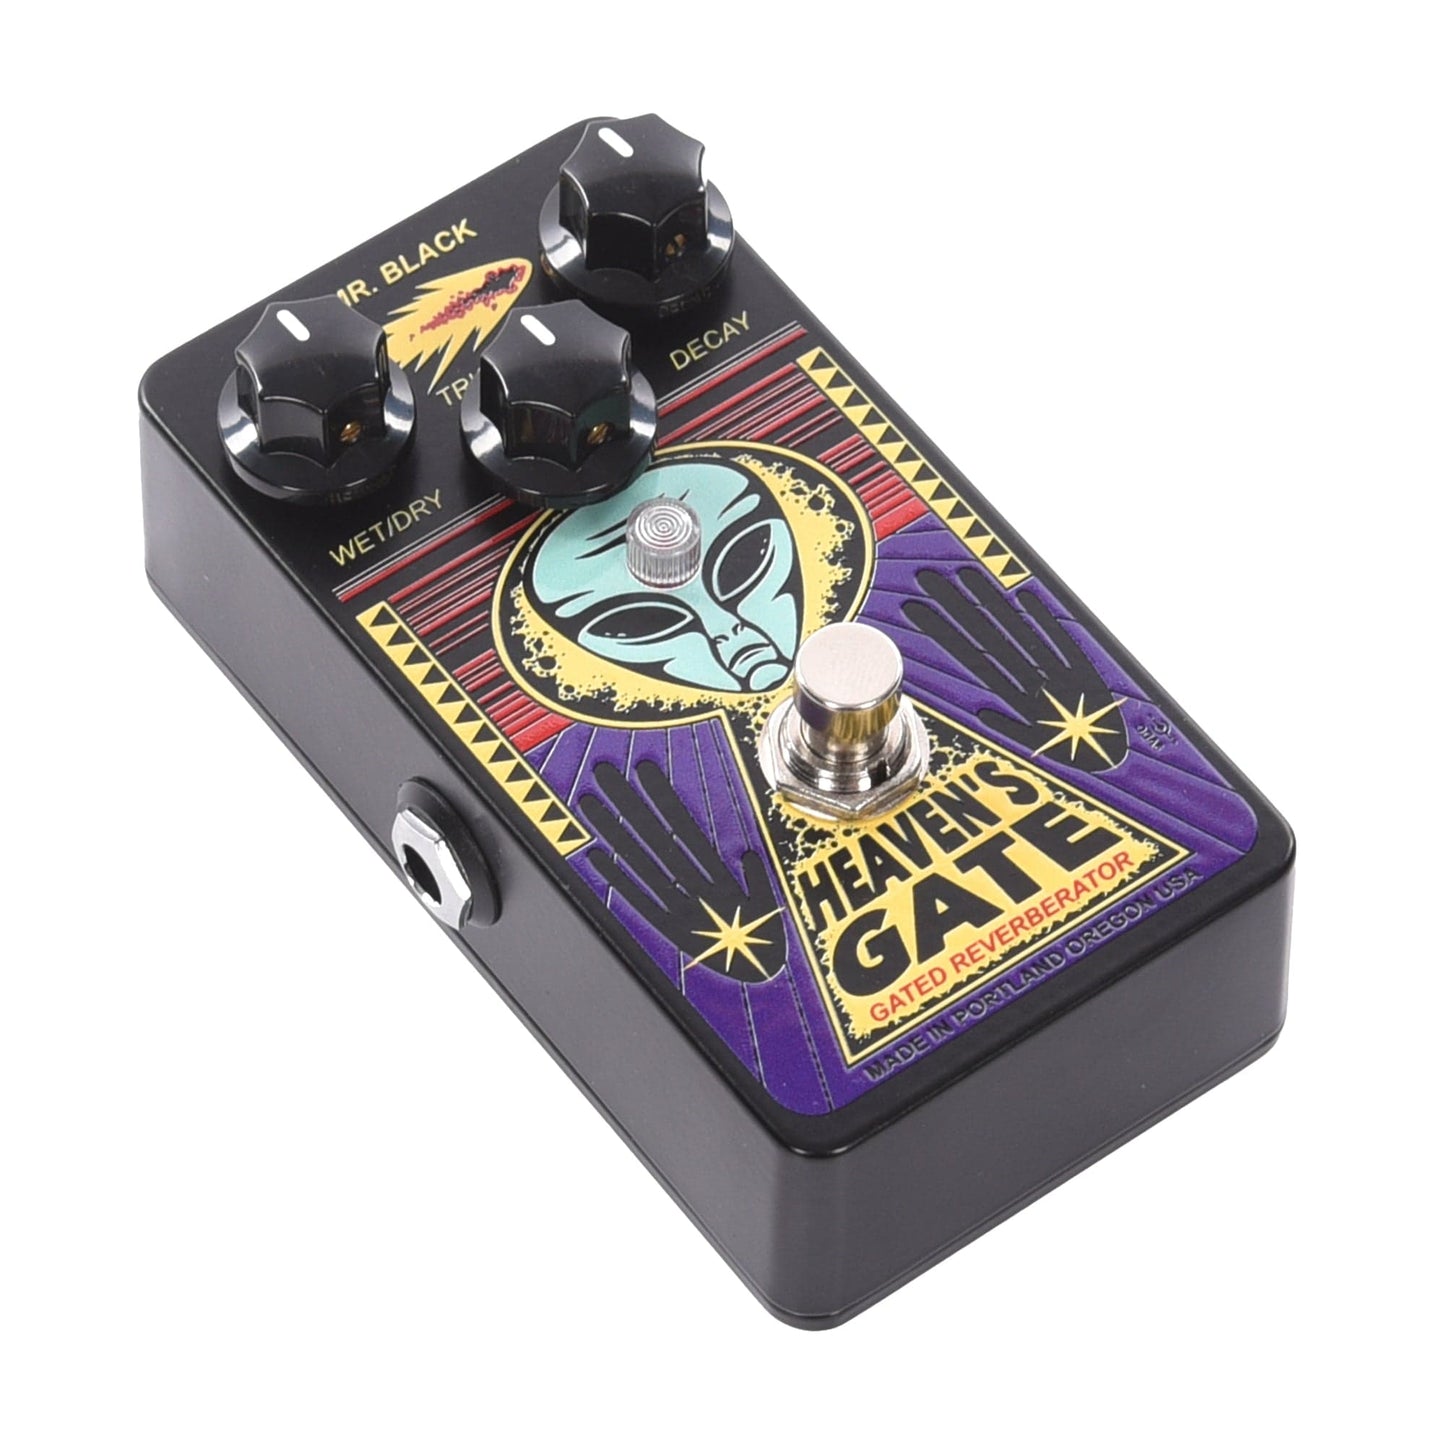 Mr. Black Heaven's Gate Gated Reverb Pedal Effects and Pedals / Reverb